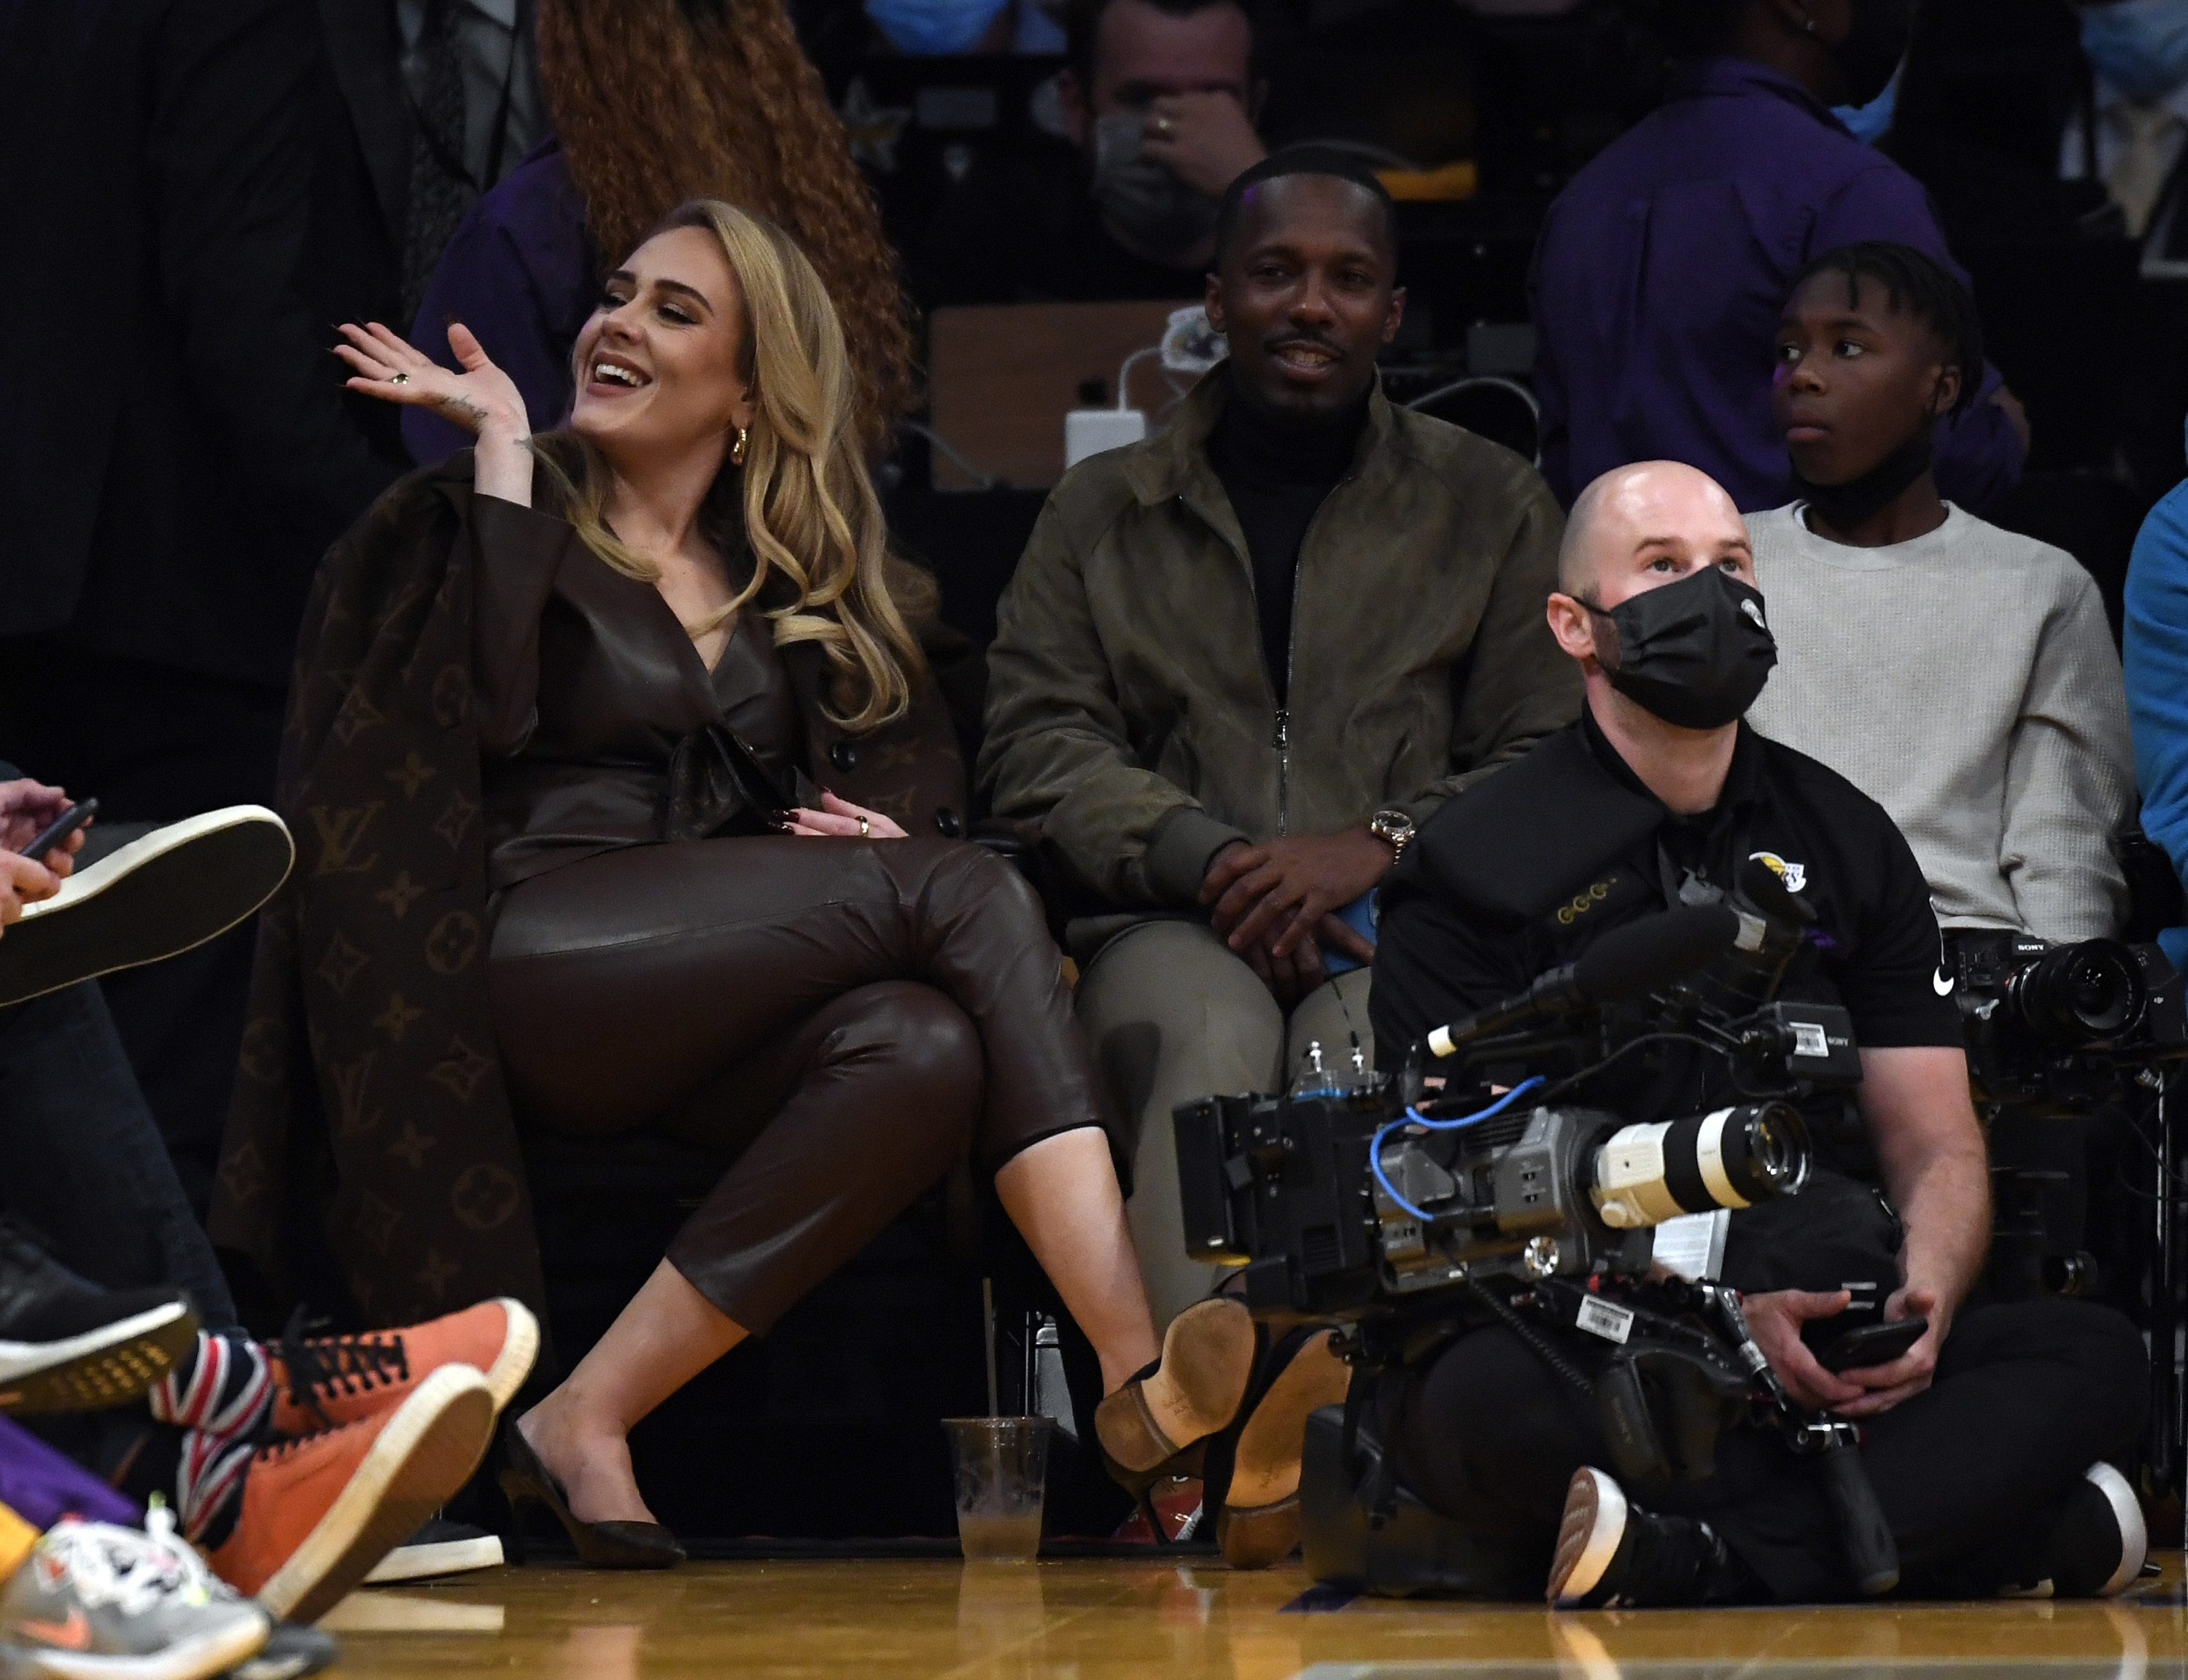 Adele waves to someone over her shoulder at a basketball game